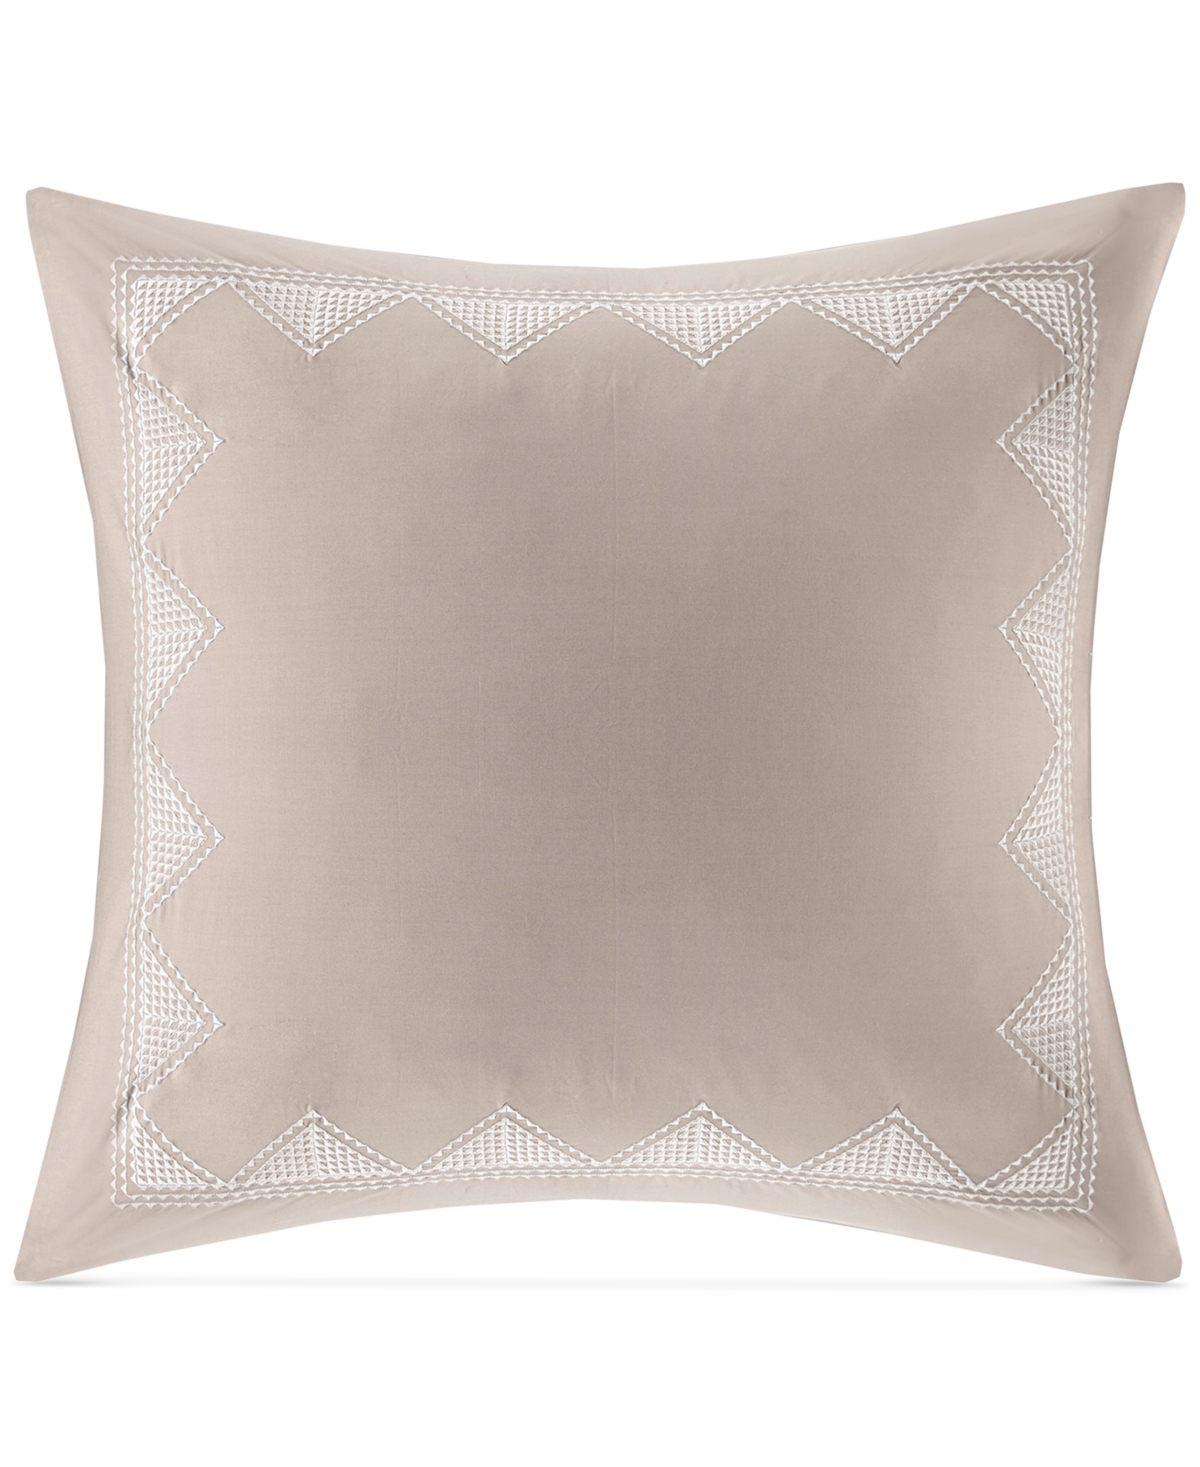 Closeout! Ink+Ivy Isla Embroidered Cotton Sham, European - Taupe